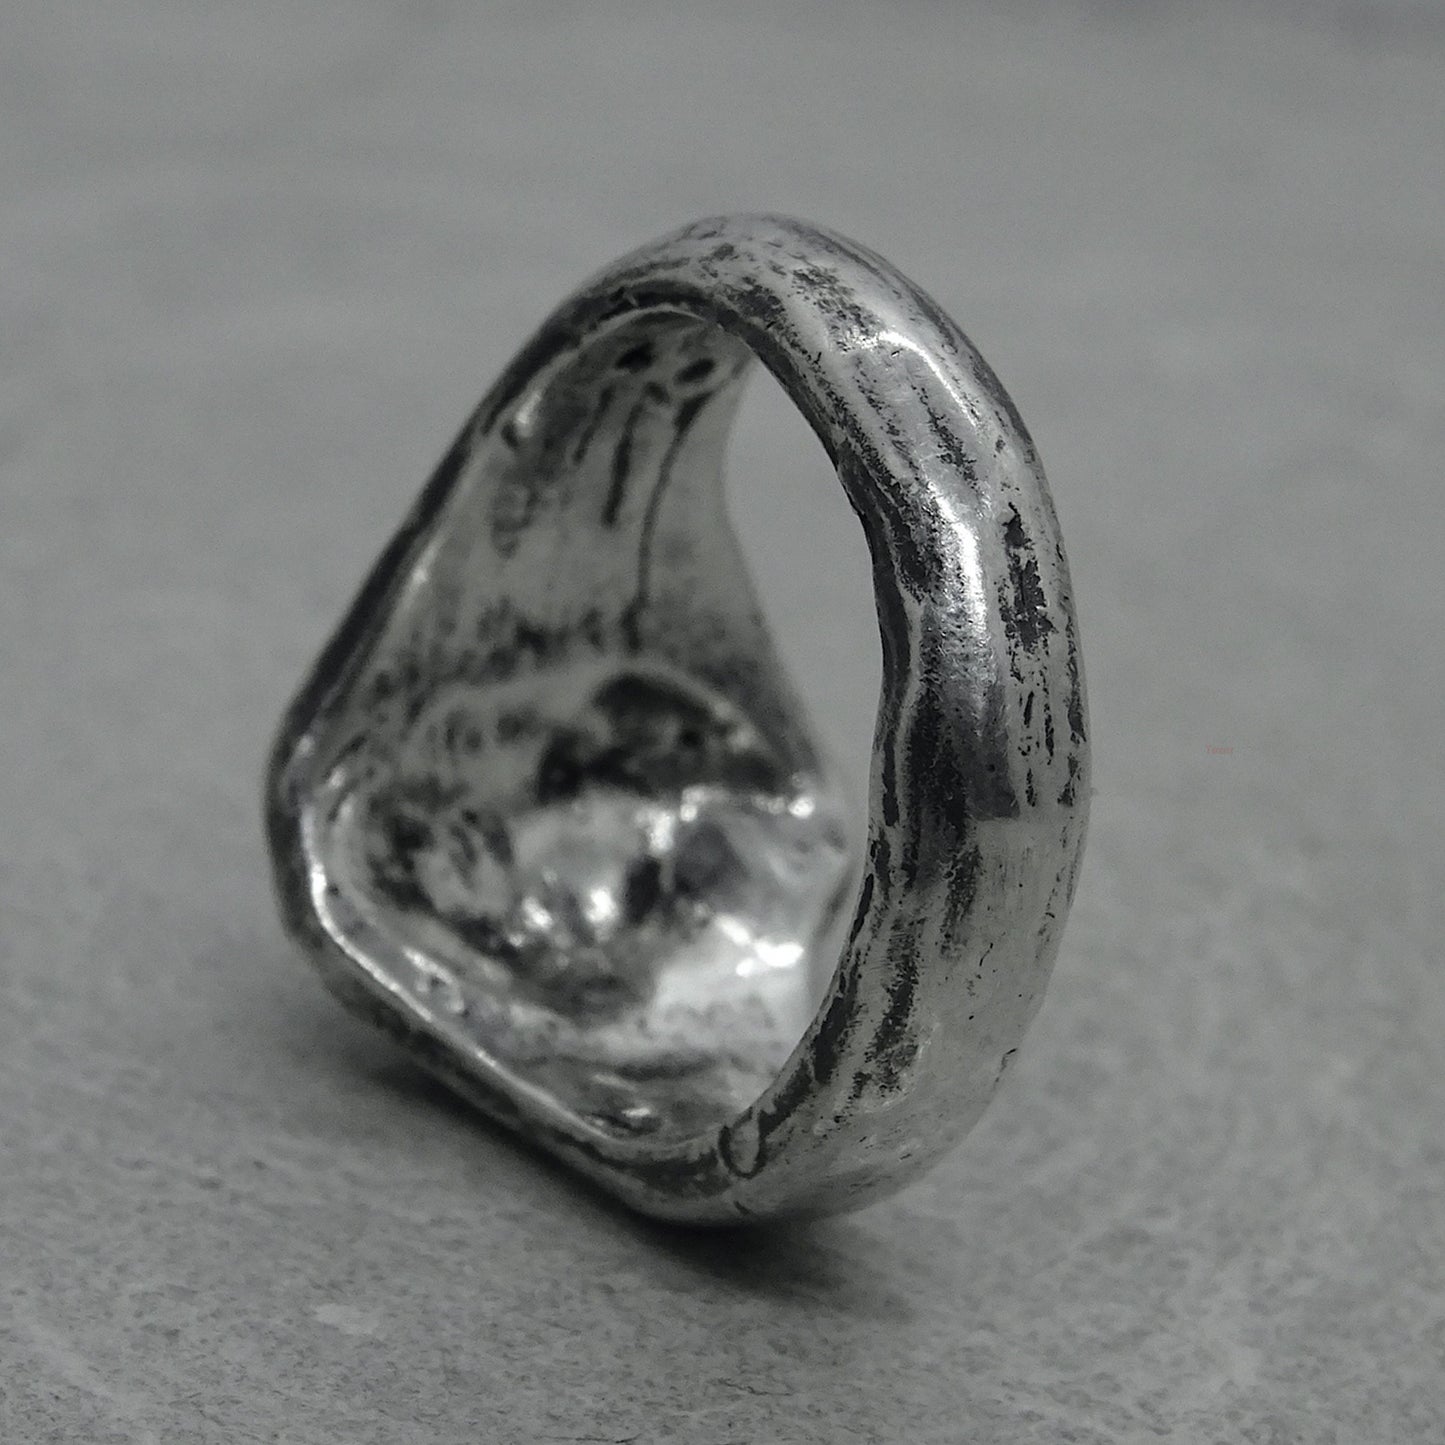 5th Element ring- oval signet ring with smooth texture Rings with smooth texture Project50g 